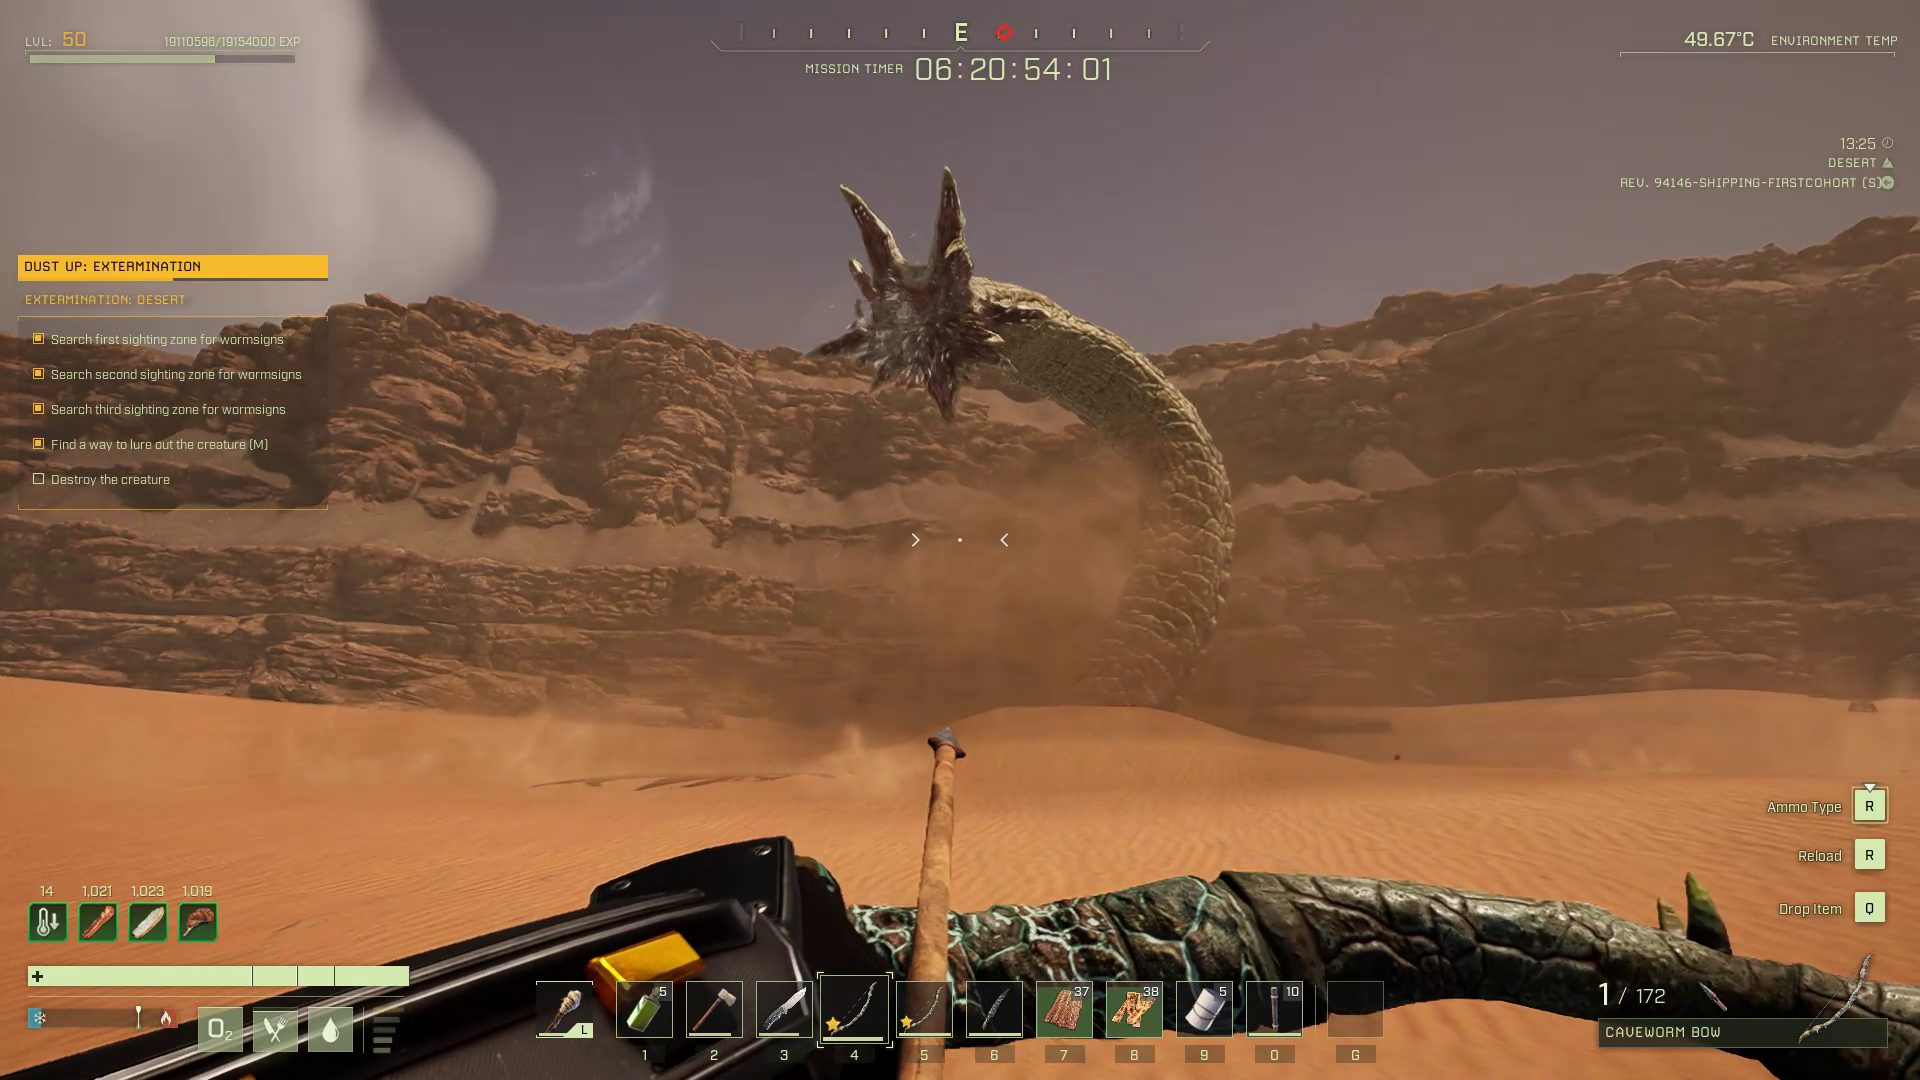 icarus mission walkthrough dust up extermination riverlands sandworm first contact